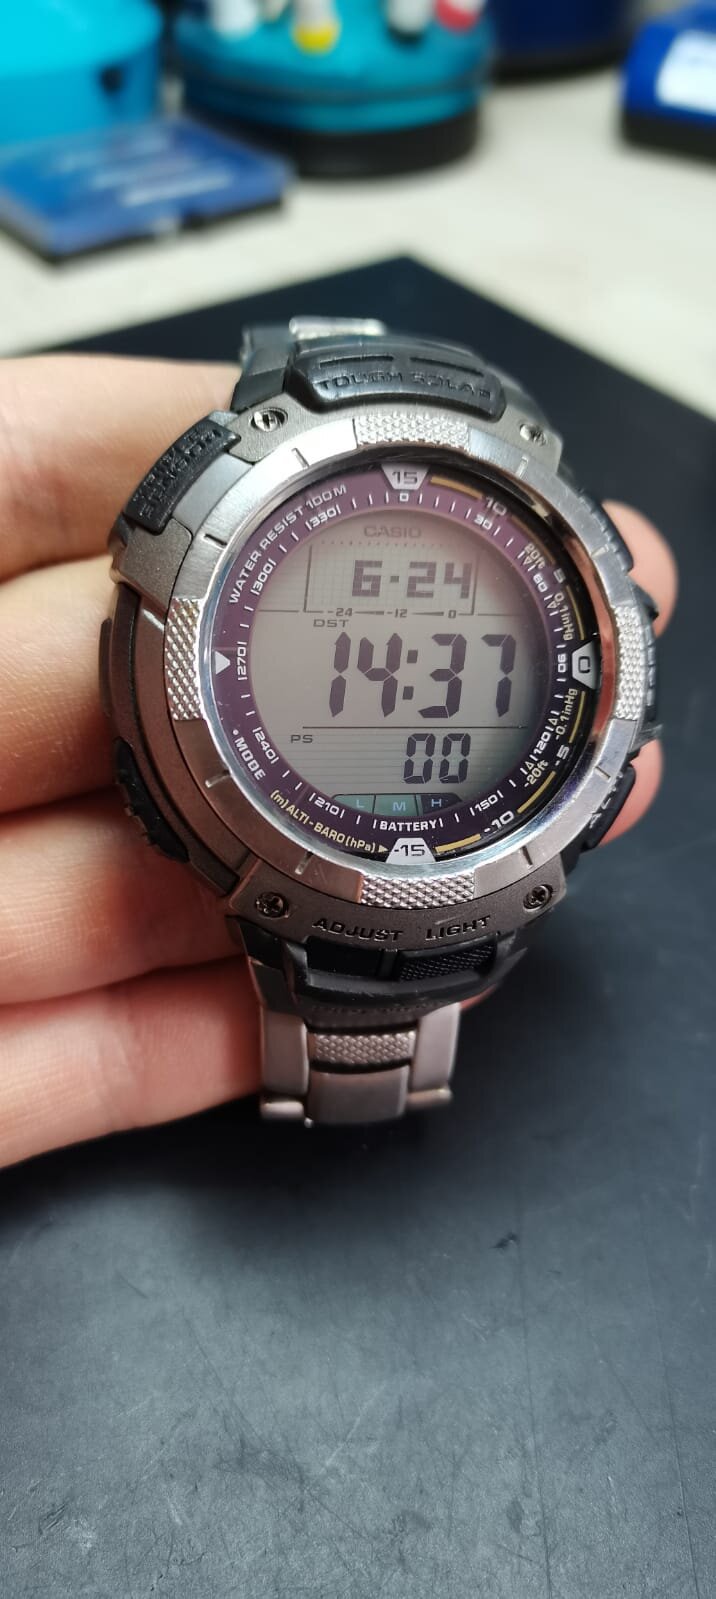 Lejlighedsvis Samarbejde Fellow Casio Pro Trek PRG-80T-7V repair. Push buttons sticking and 'open' on  display. Watch repair from Fulham, London. | Watches Fixed | Watch Repairs  | Latest Watch News | Watch Hub